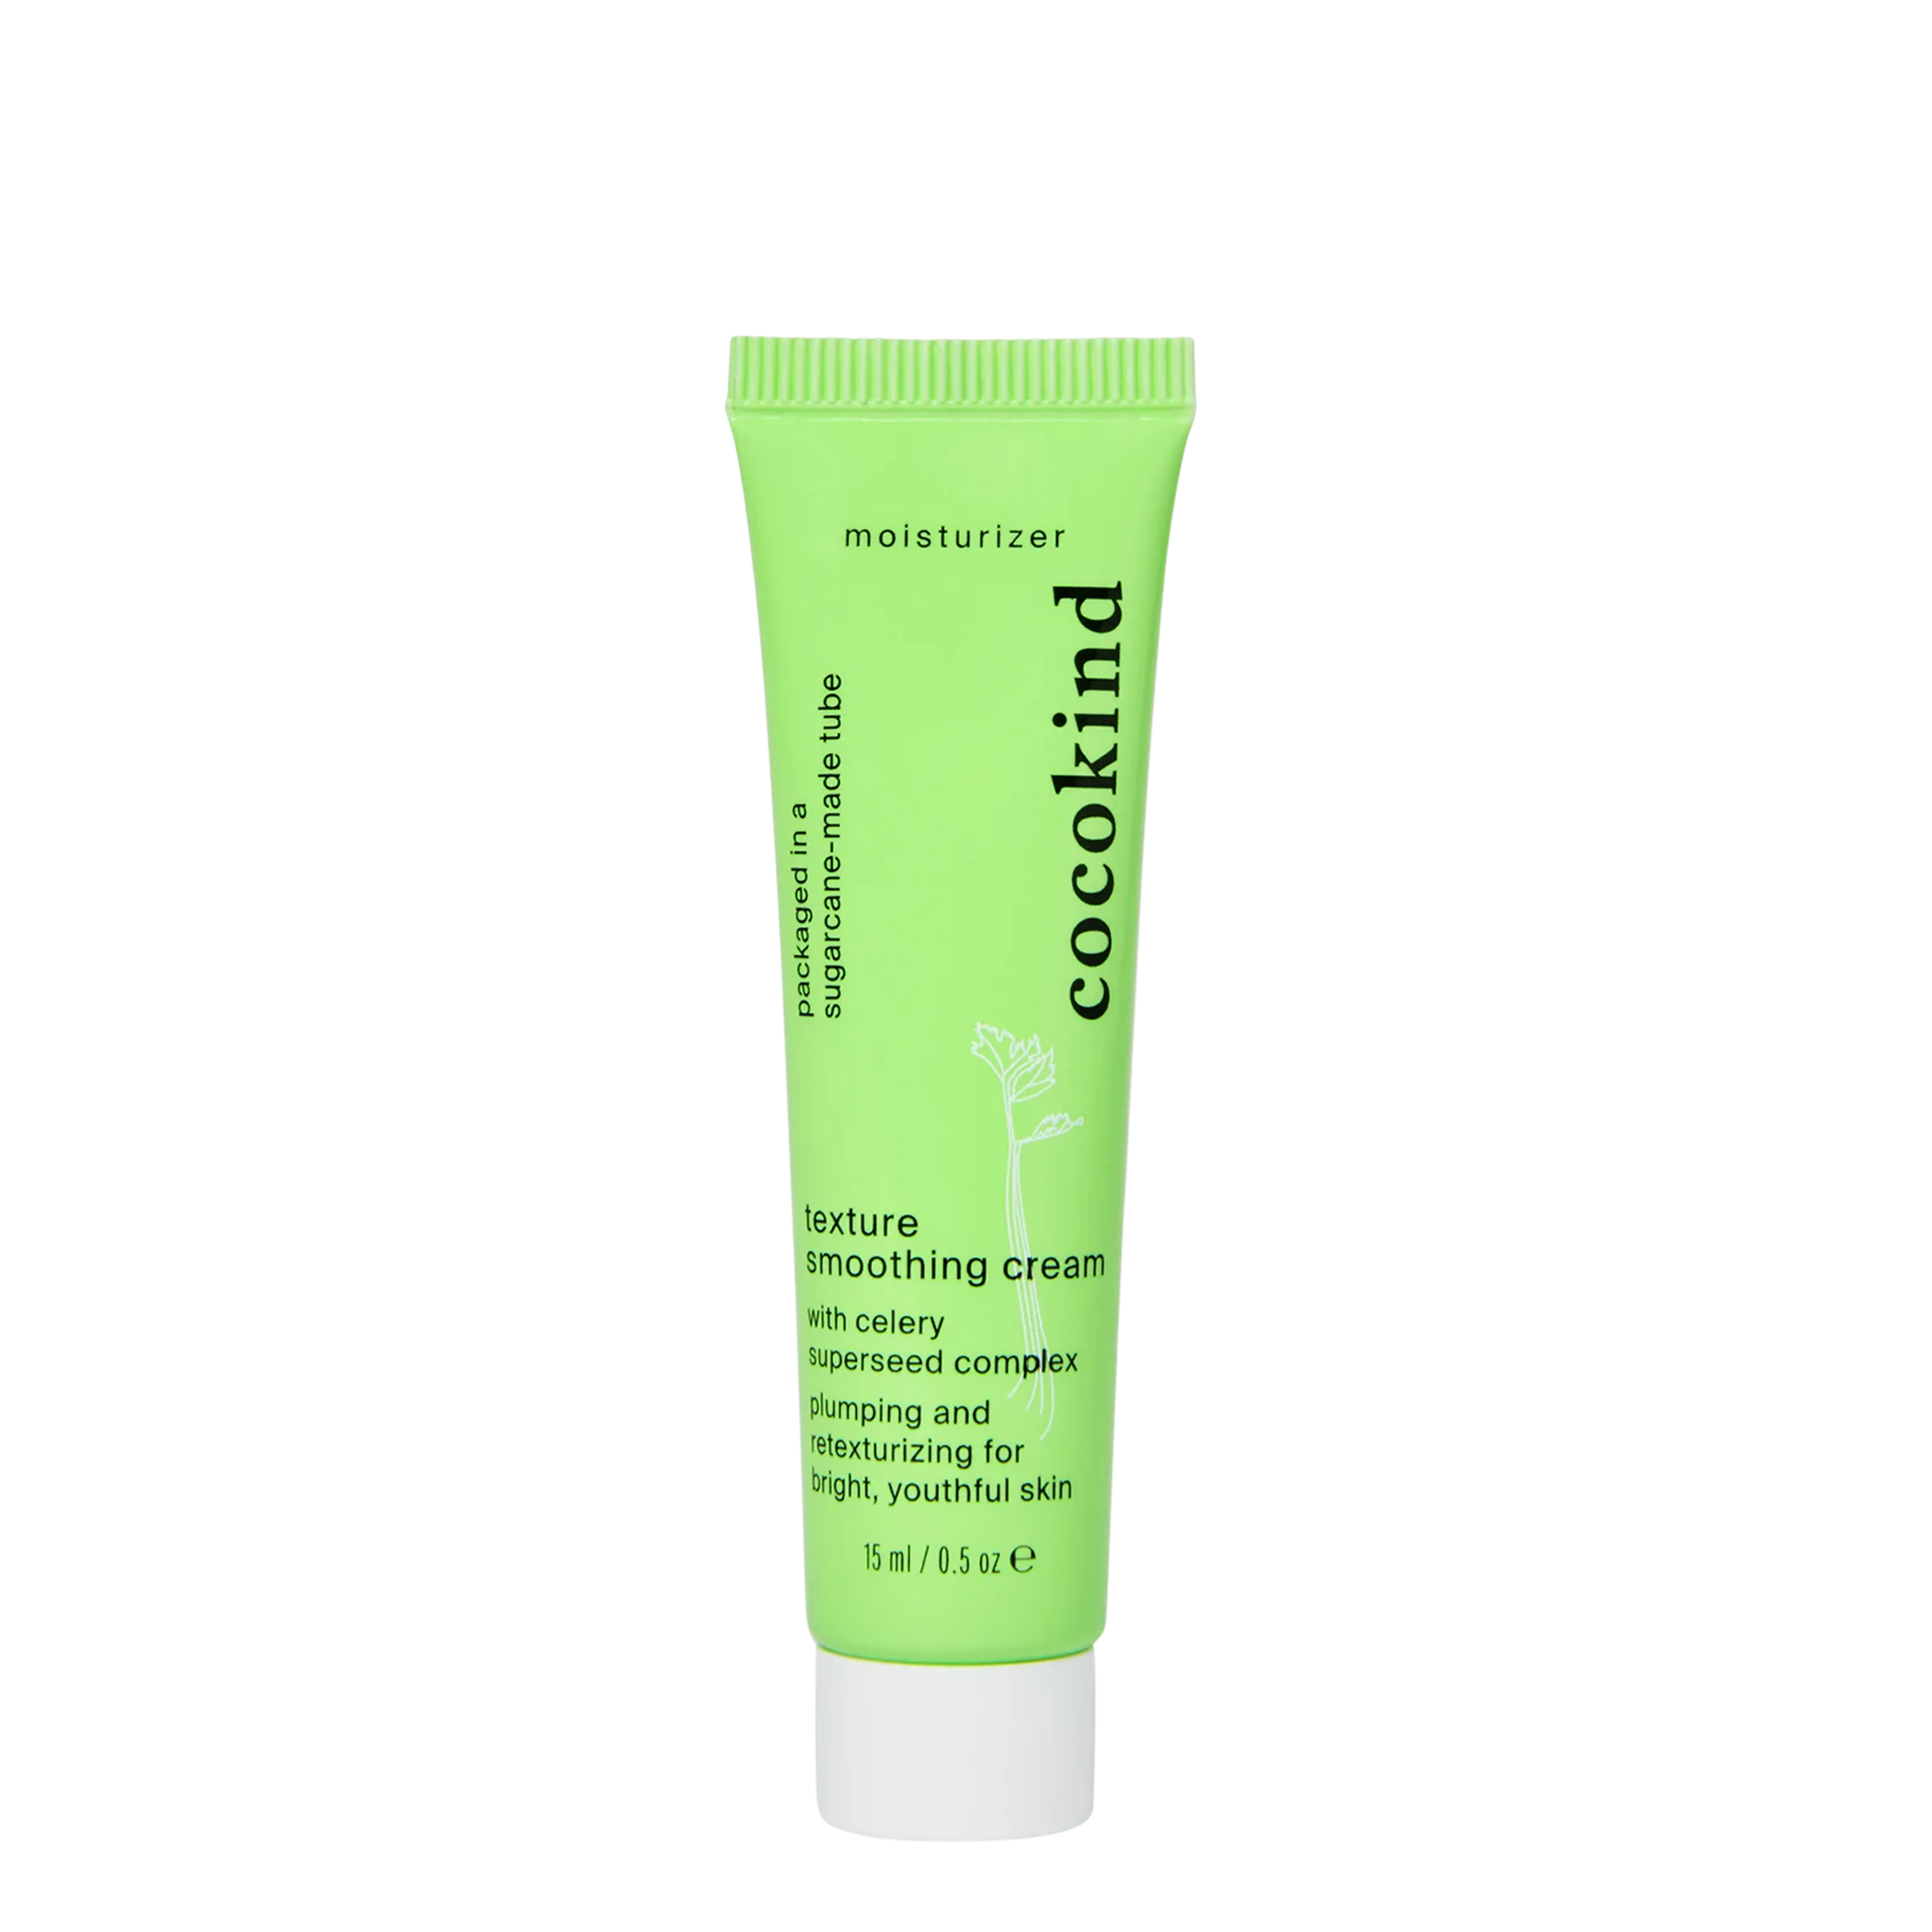 travel-size texture smoothing cream